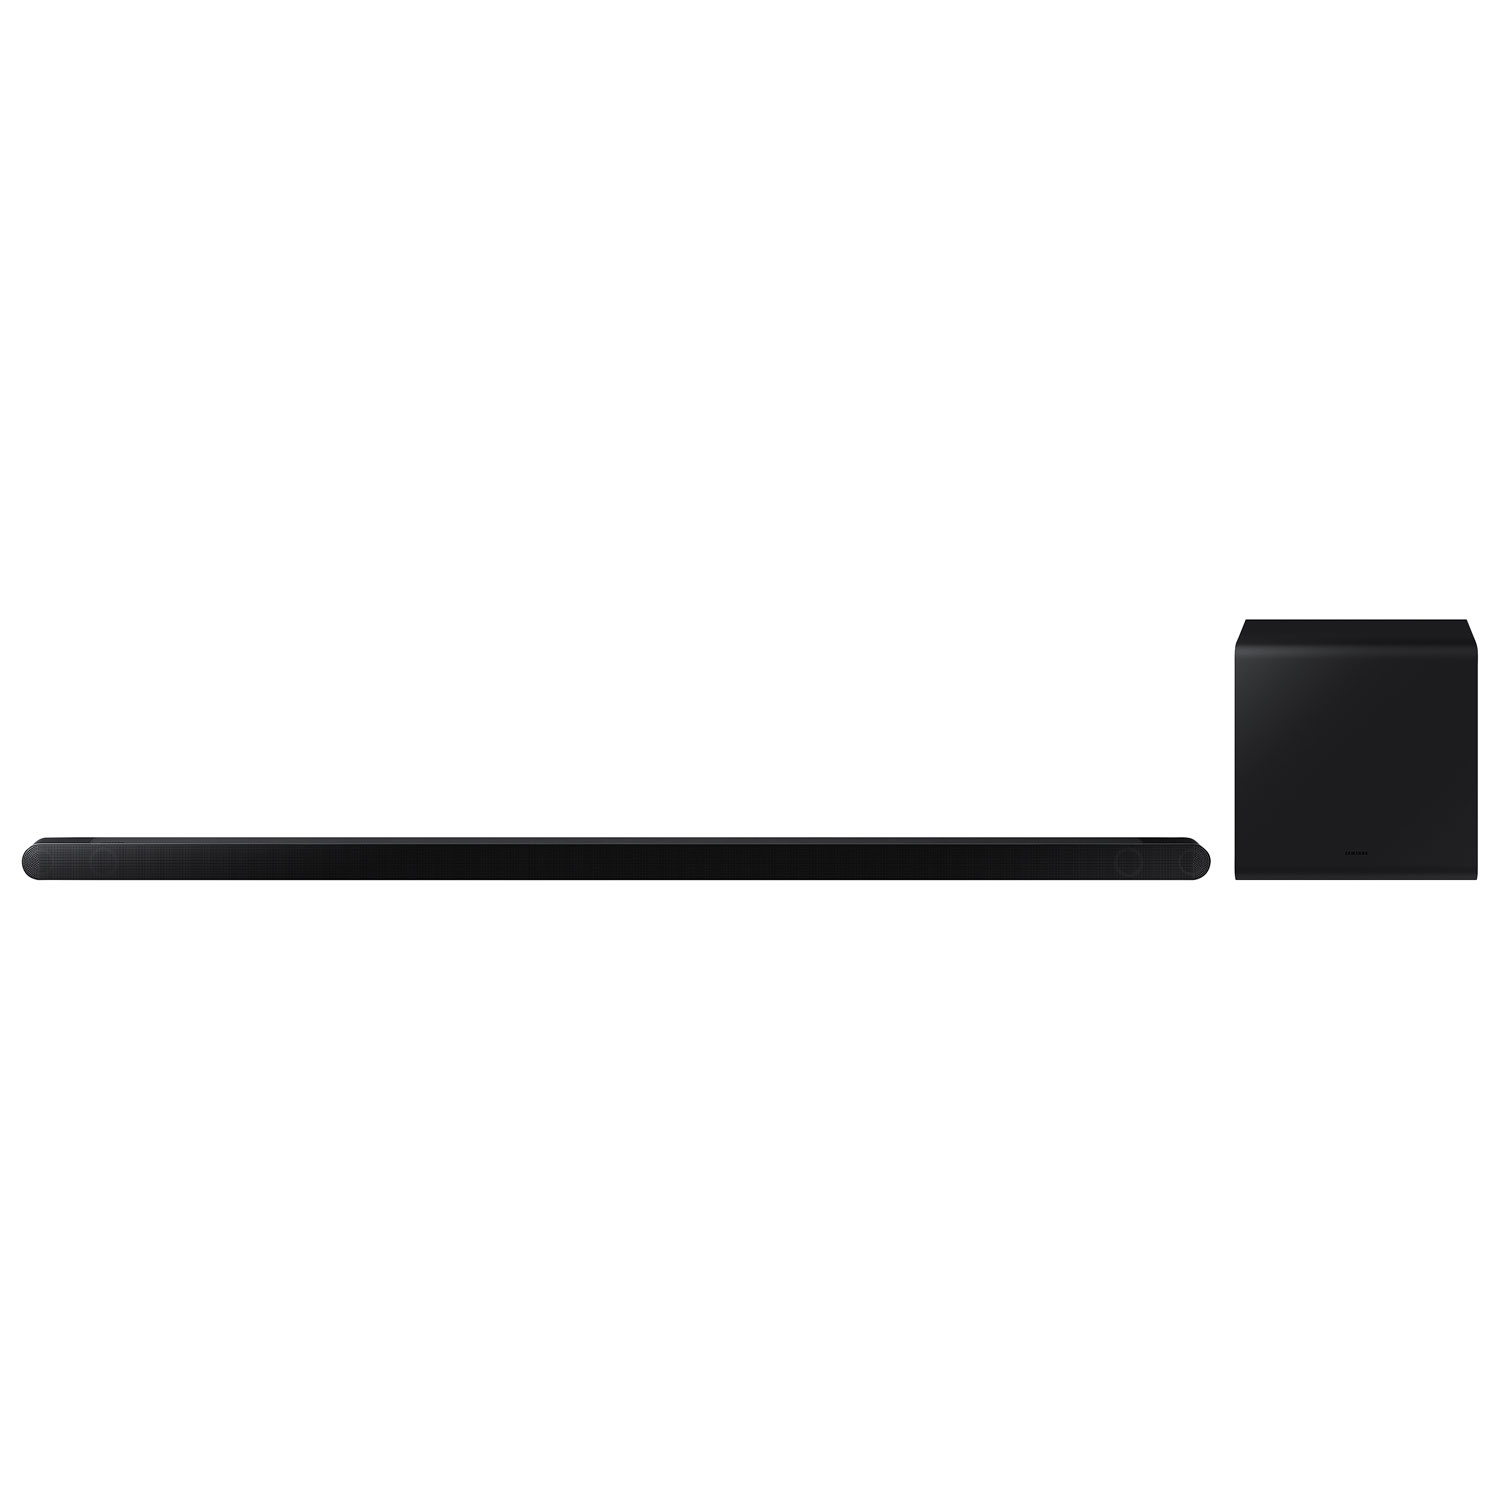 Samsung HW-S800B/ZC 3.1.2 Channel Dolby Atmos Sound Bar with Wireless Subwoofer